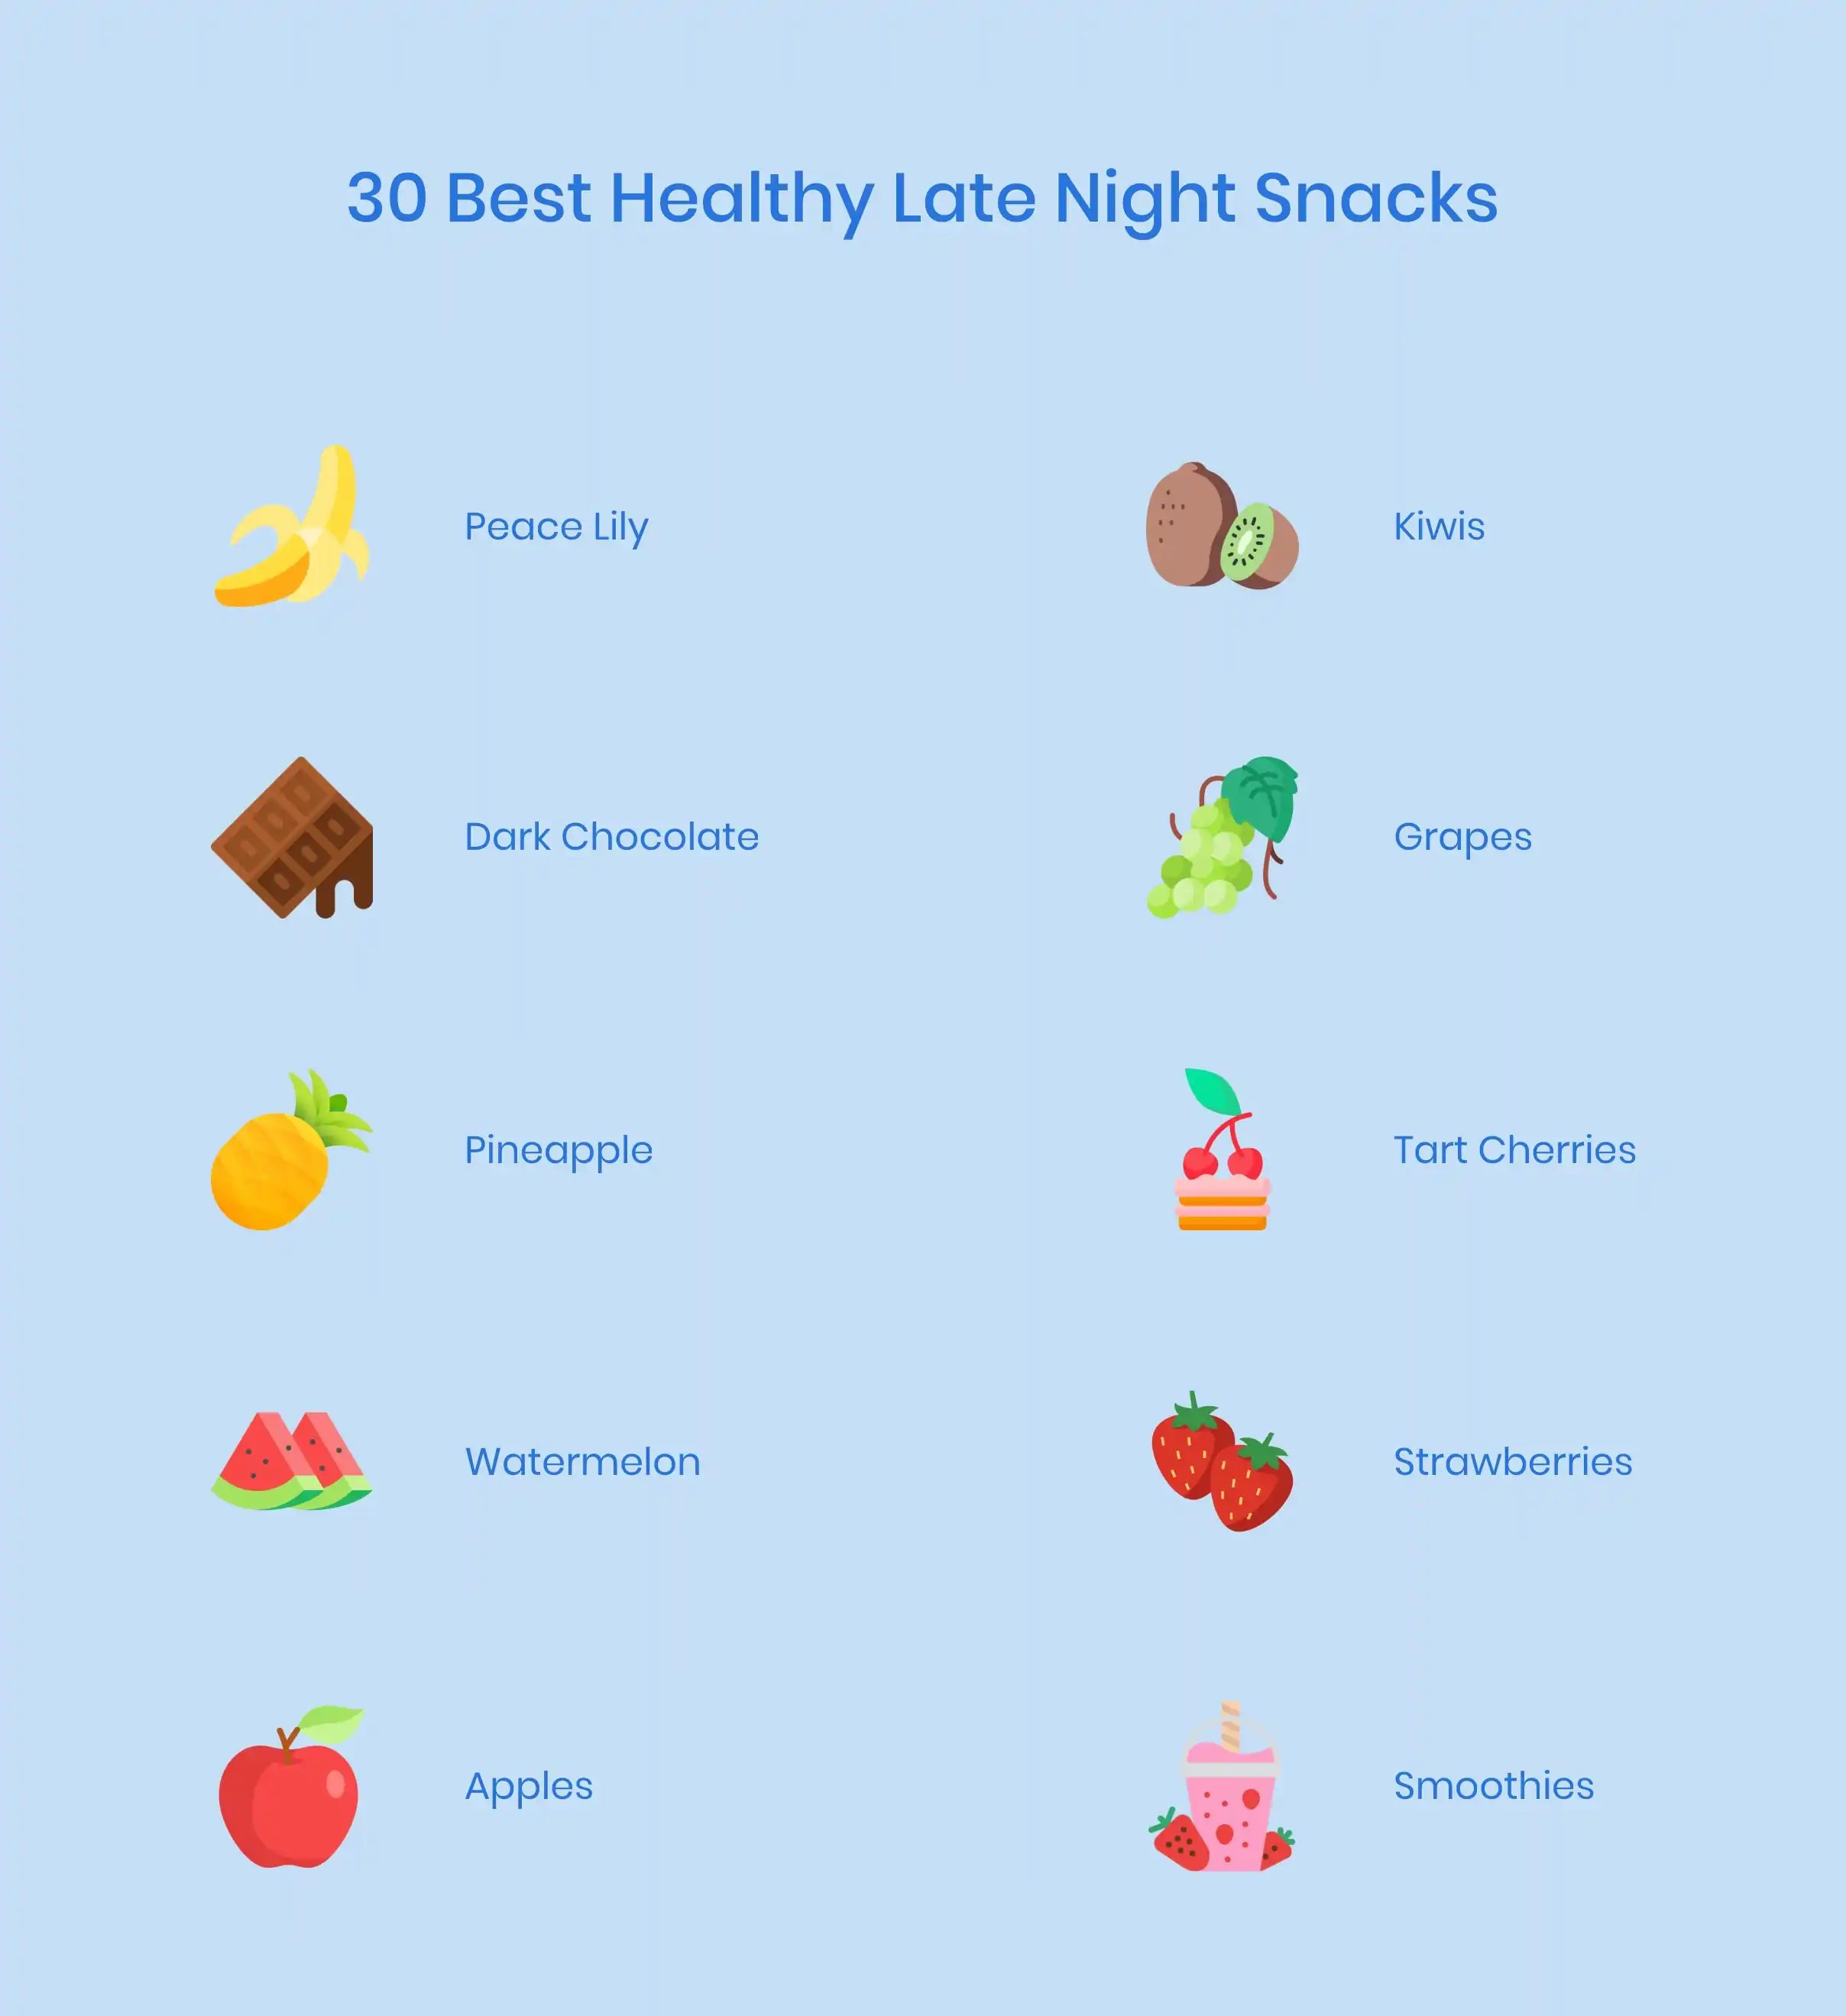 5 Easy Ways to Stop Late Night Snacking - Working Against Gravity